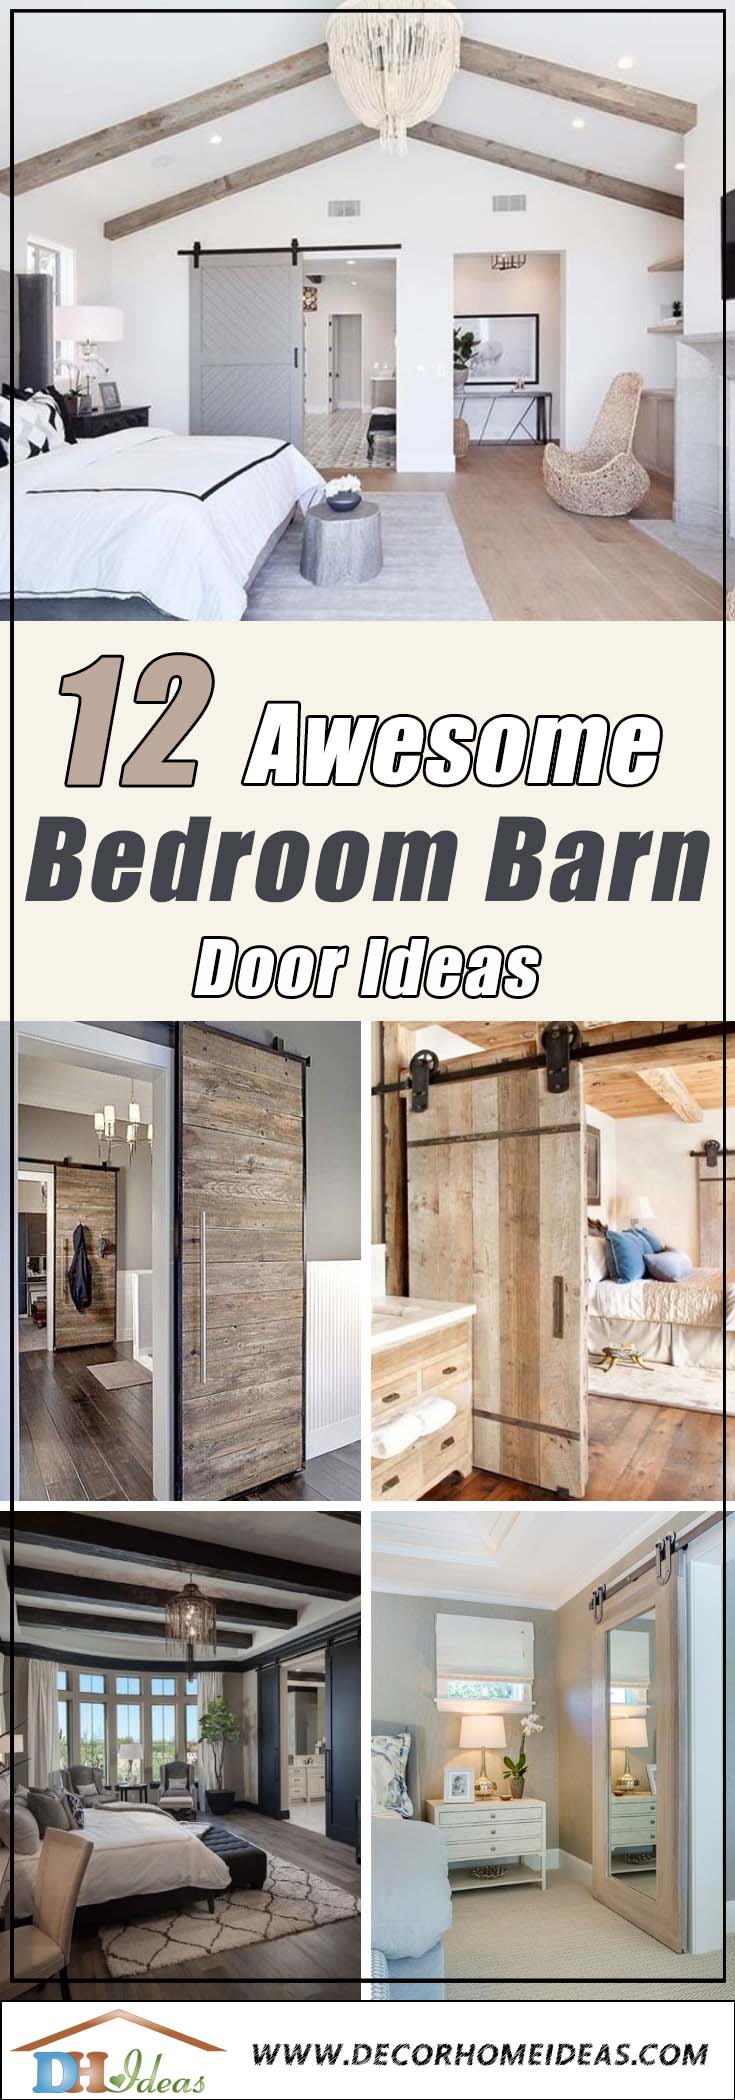 Don't miss these bedroom barn door ideas! You'll find all barn door ideas here -sliding, farmhouse, modern, wooden, minimalistic, etc.